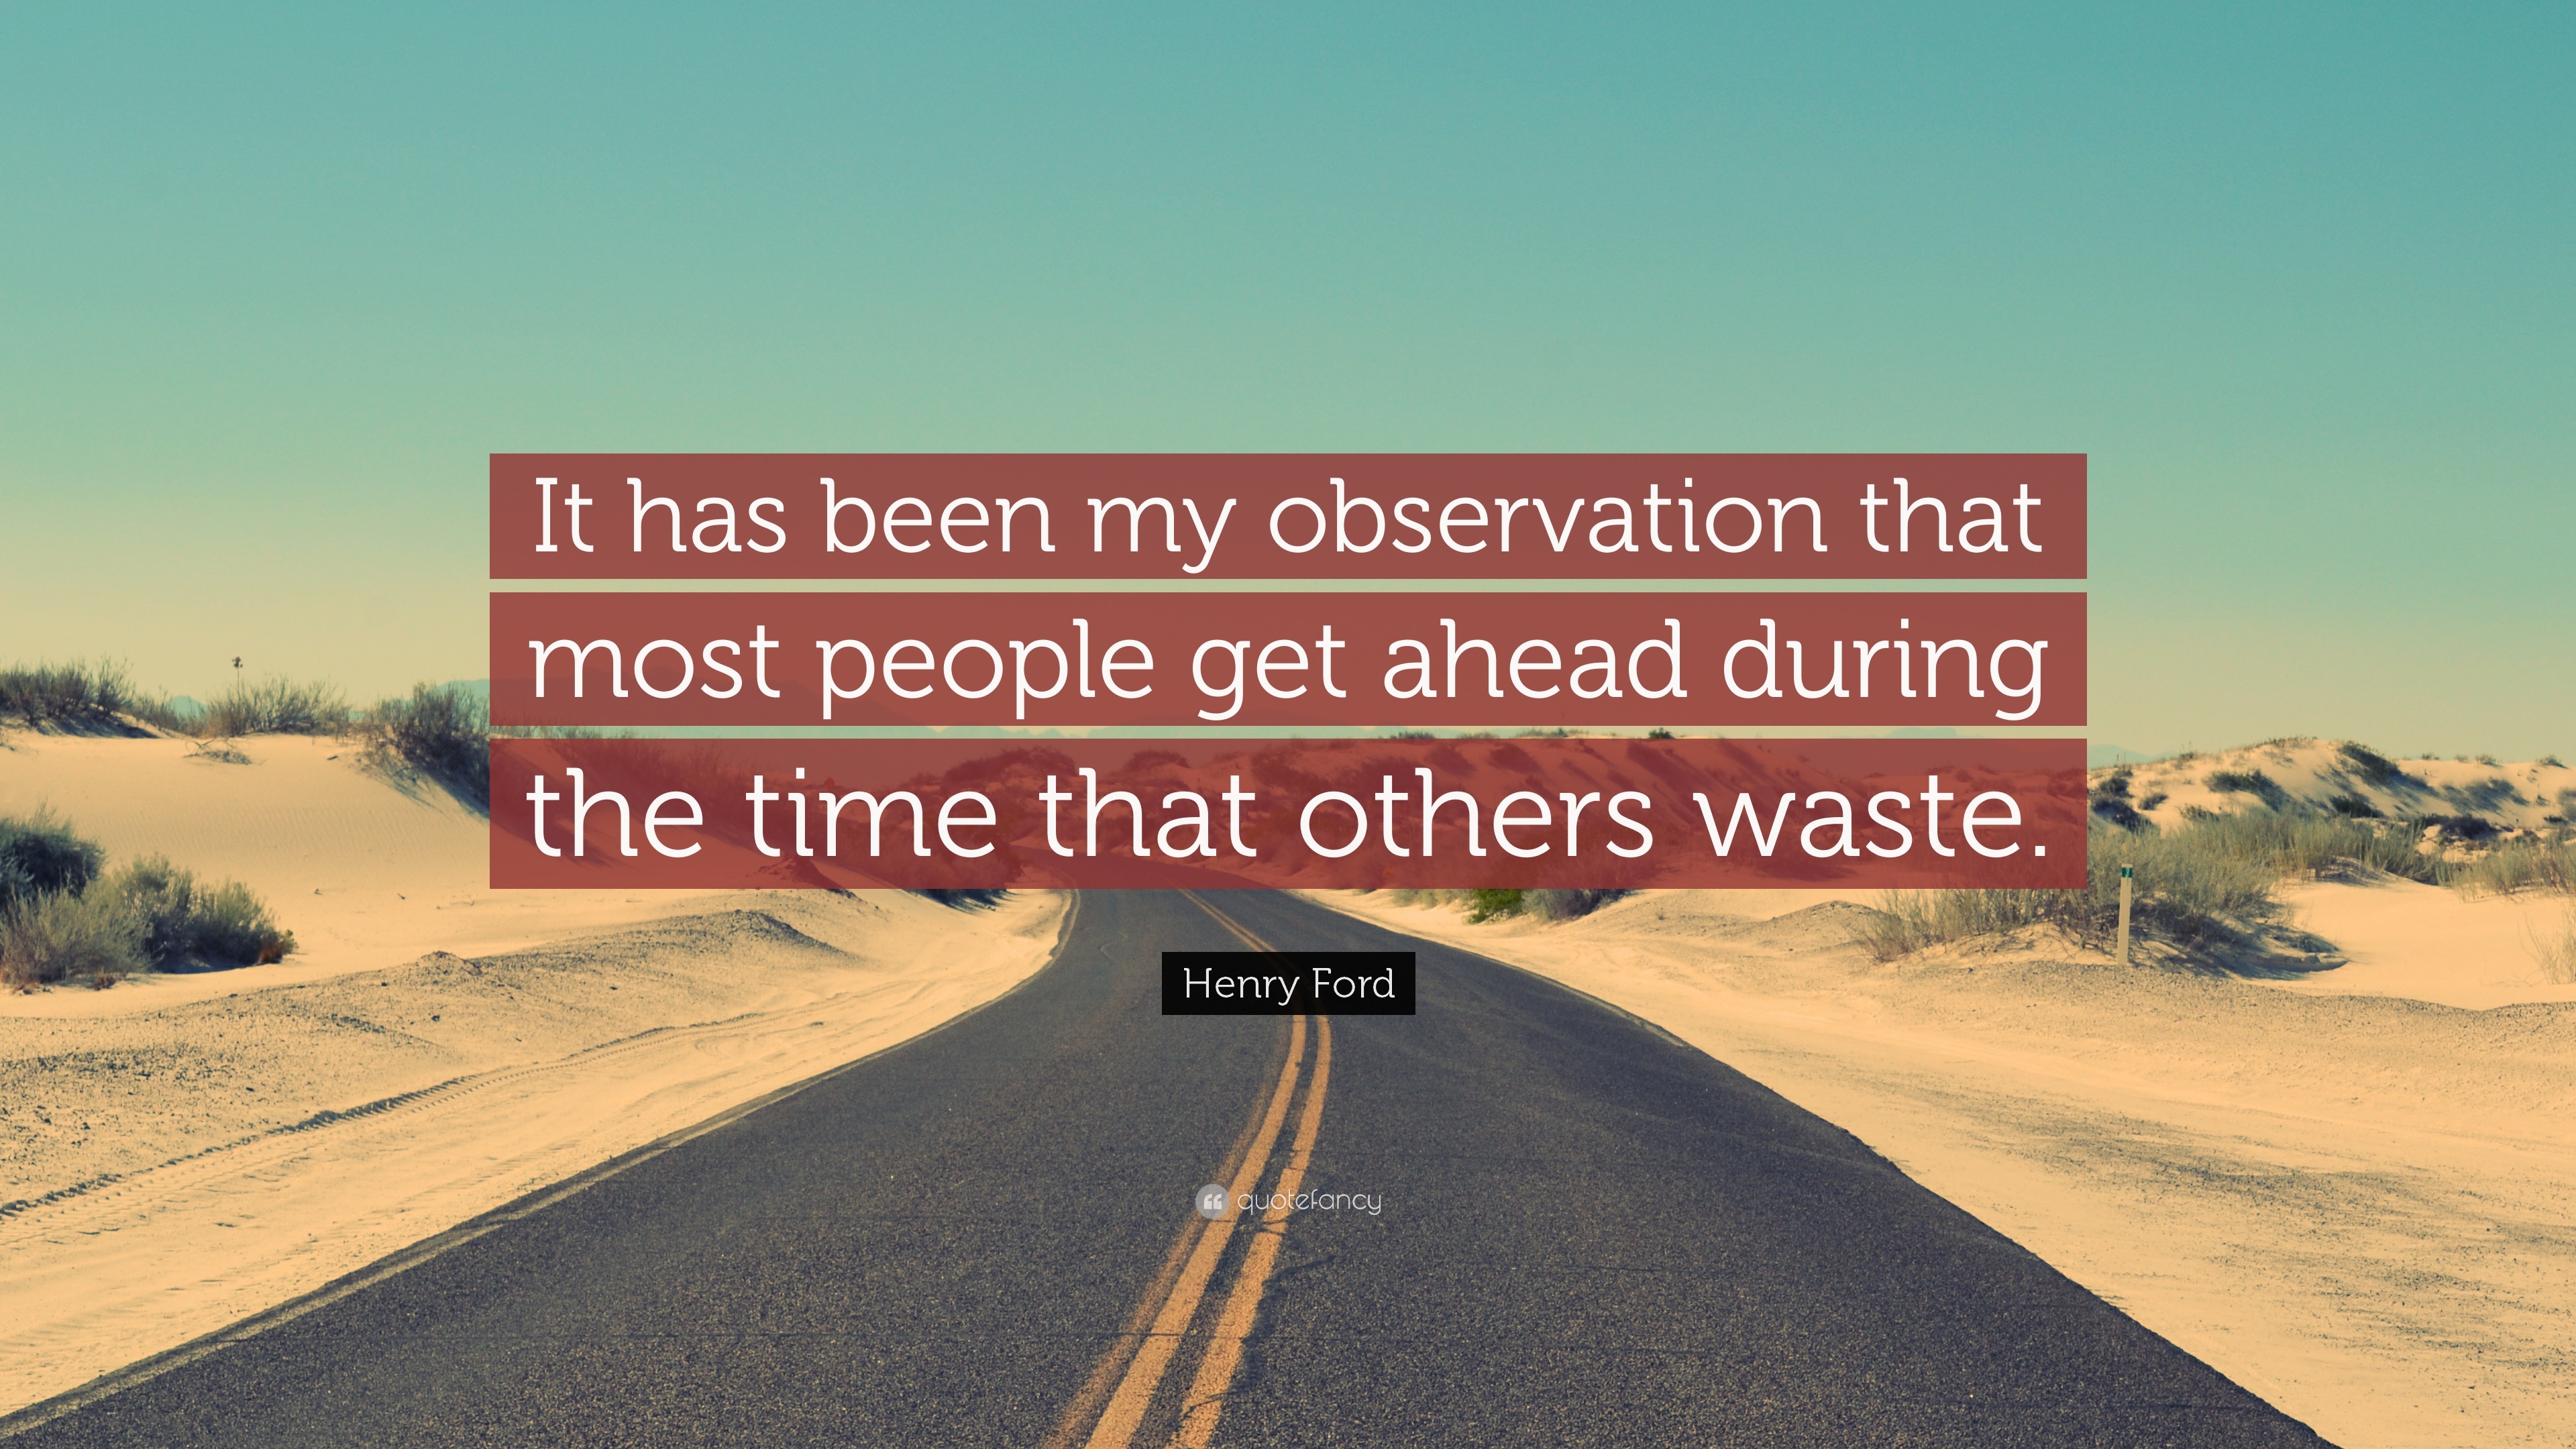 Henry ford quote wasting time #9